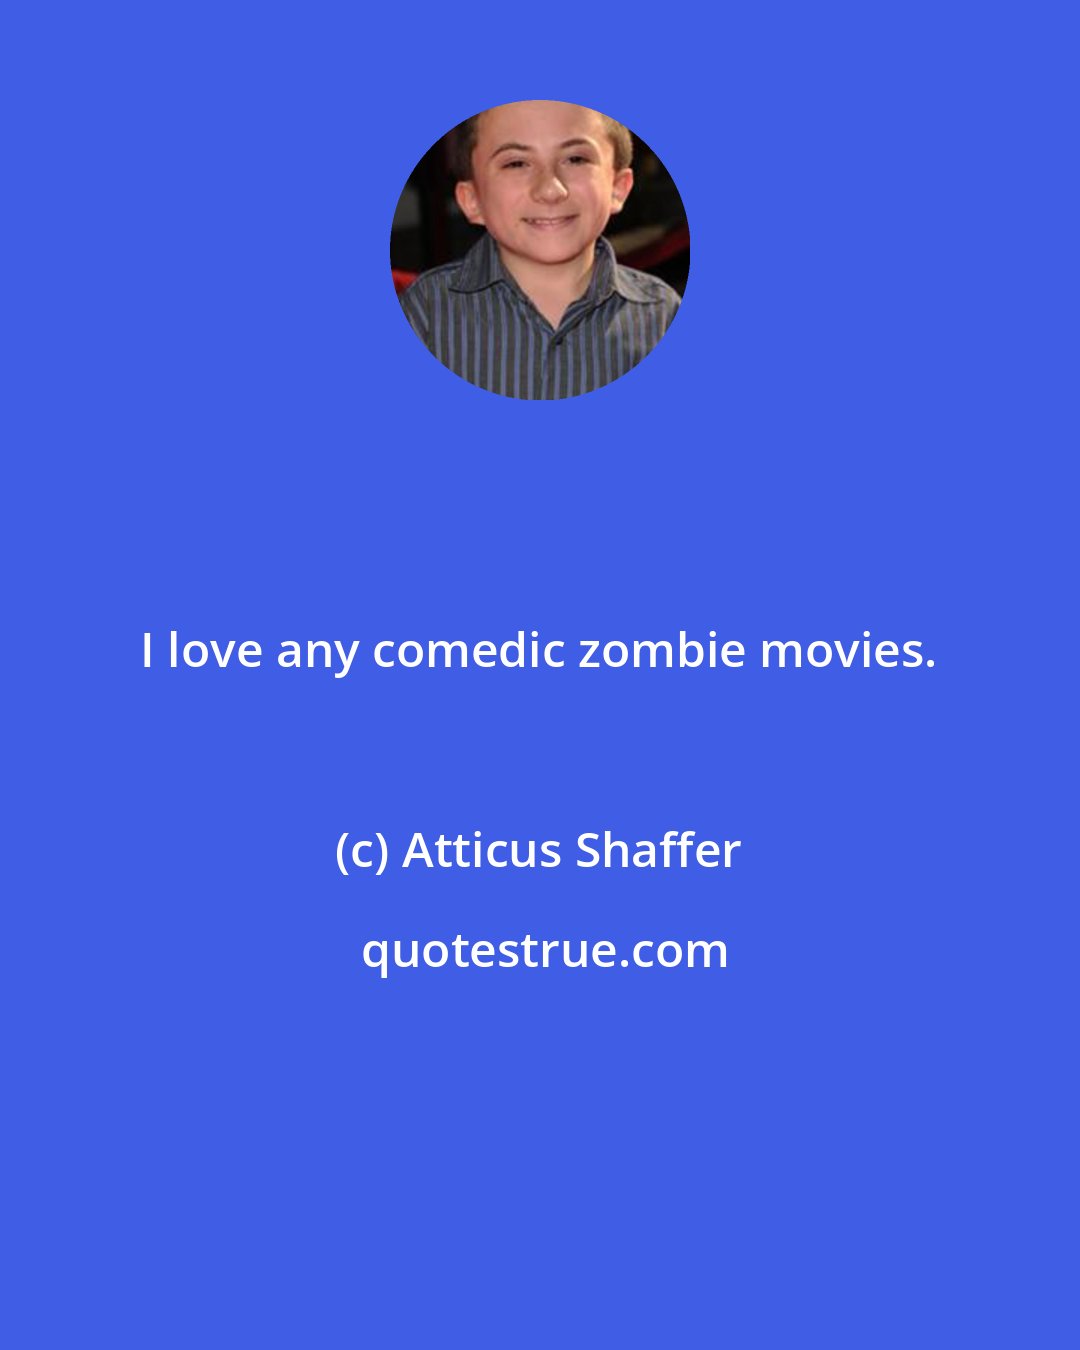 Atticus Shaffer: I love any comedic zombie movies.